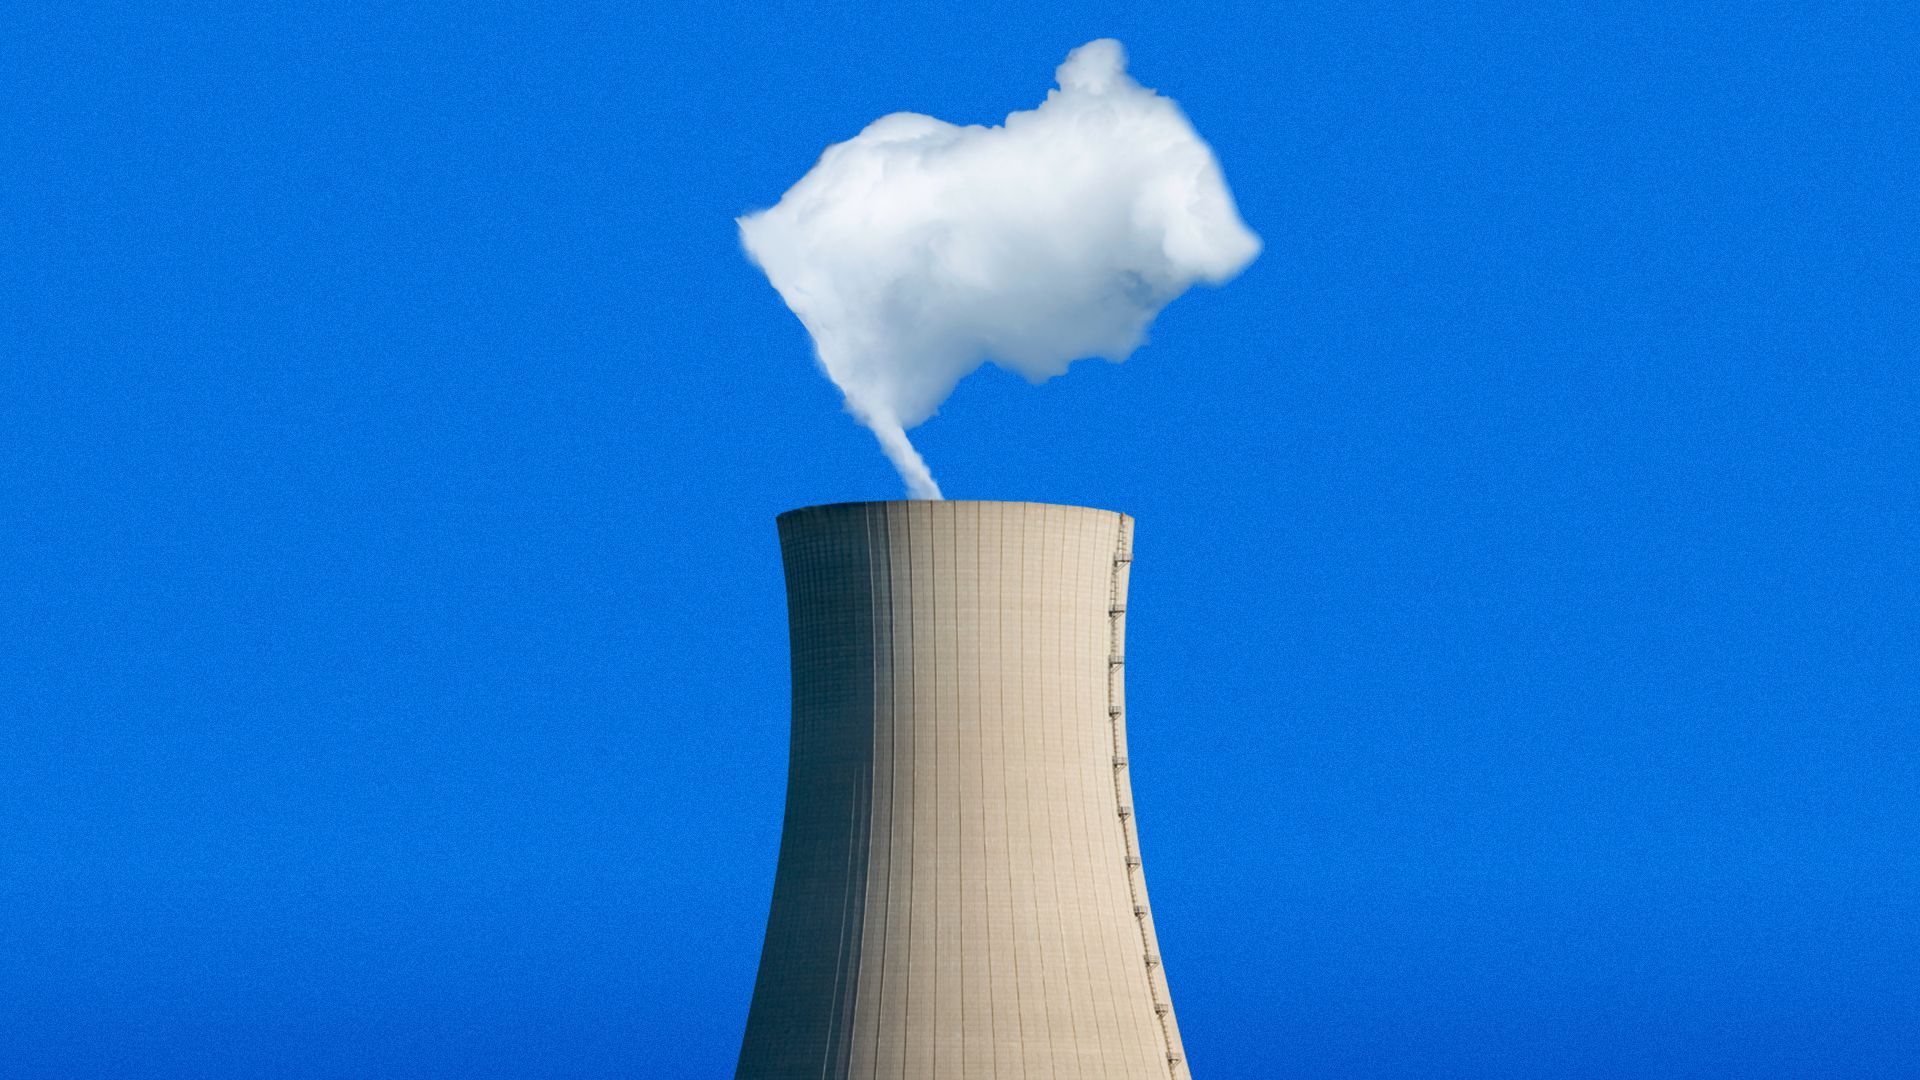 Illustration of a nuclear power plant tower with steam in the shape of a white flag